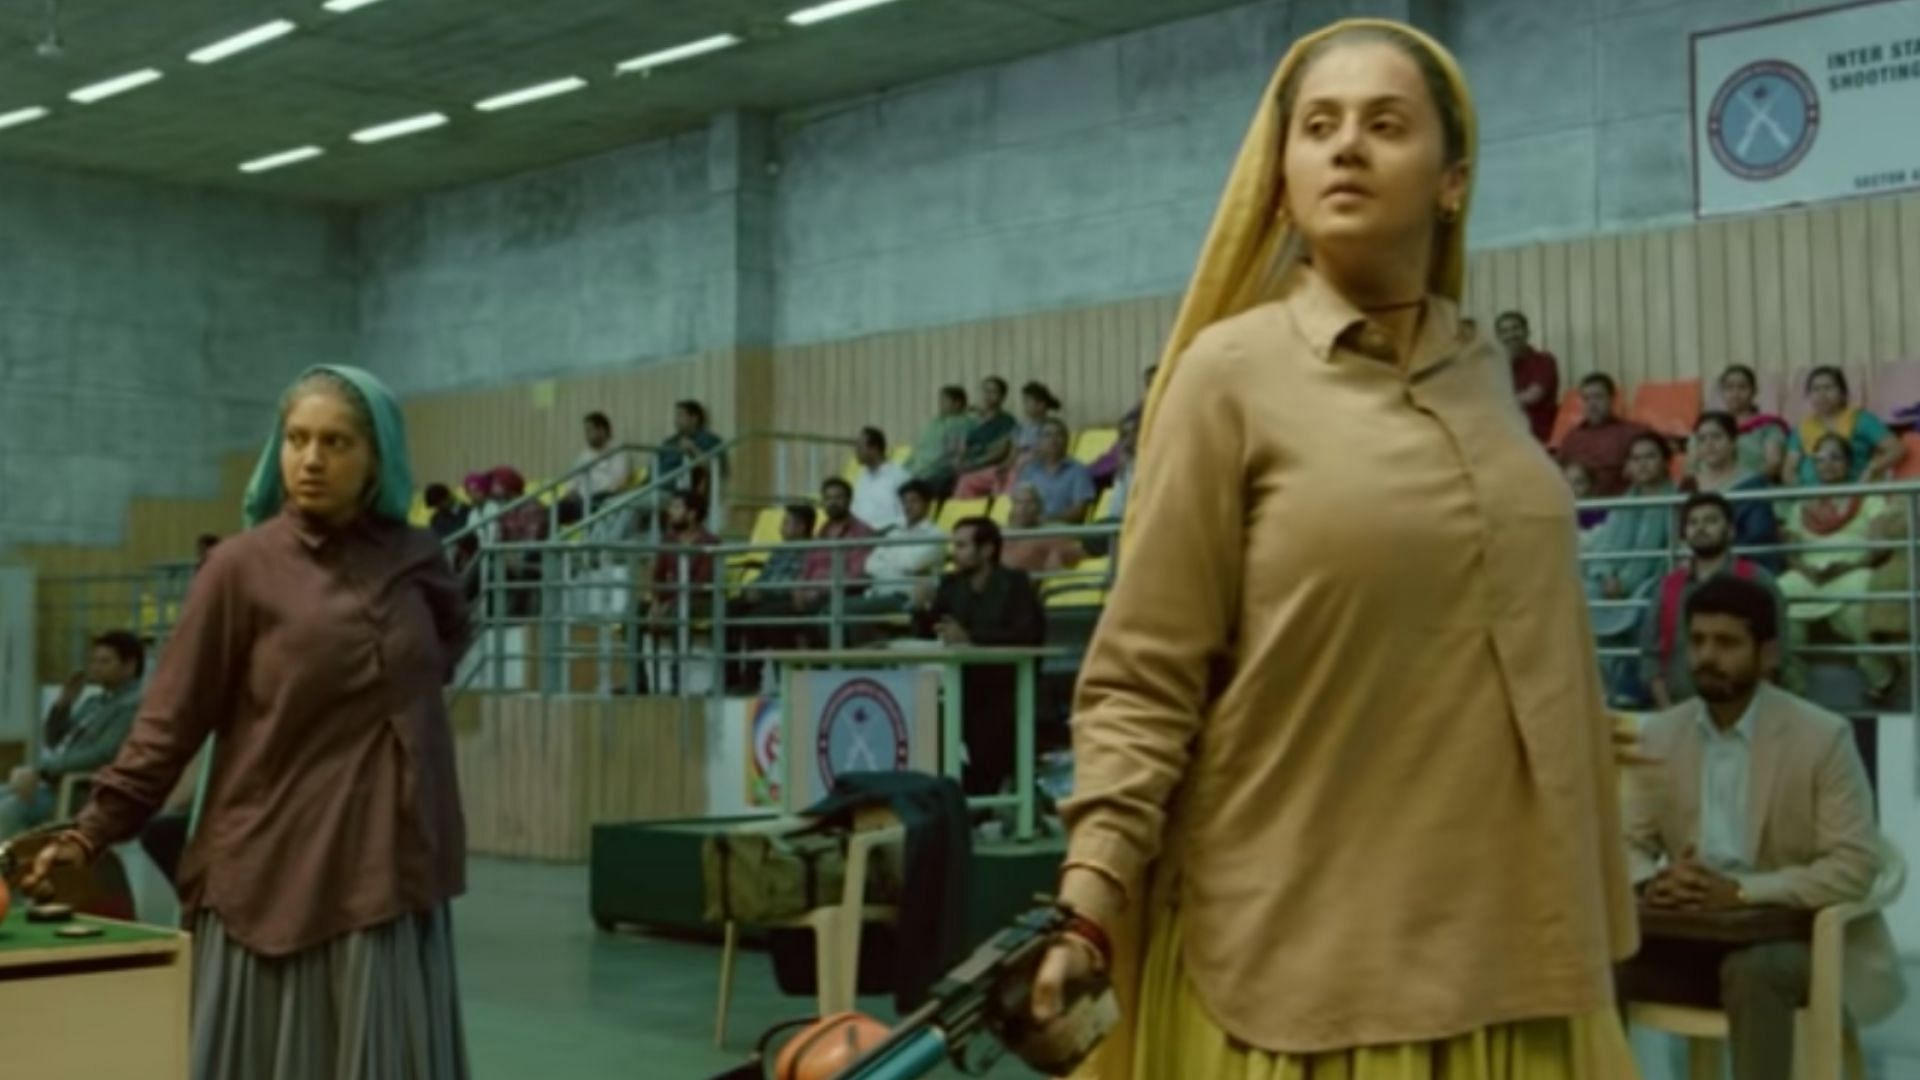 Bhumi Pednekar and Taapsee Pannu play the world’s oldest sharpshooters in <i>Saand Ki Aankh.</i>